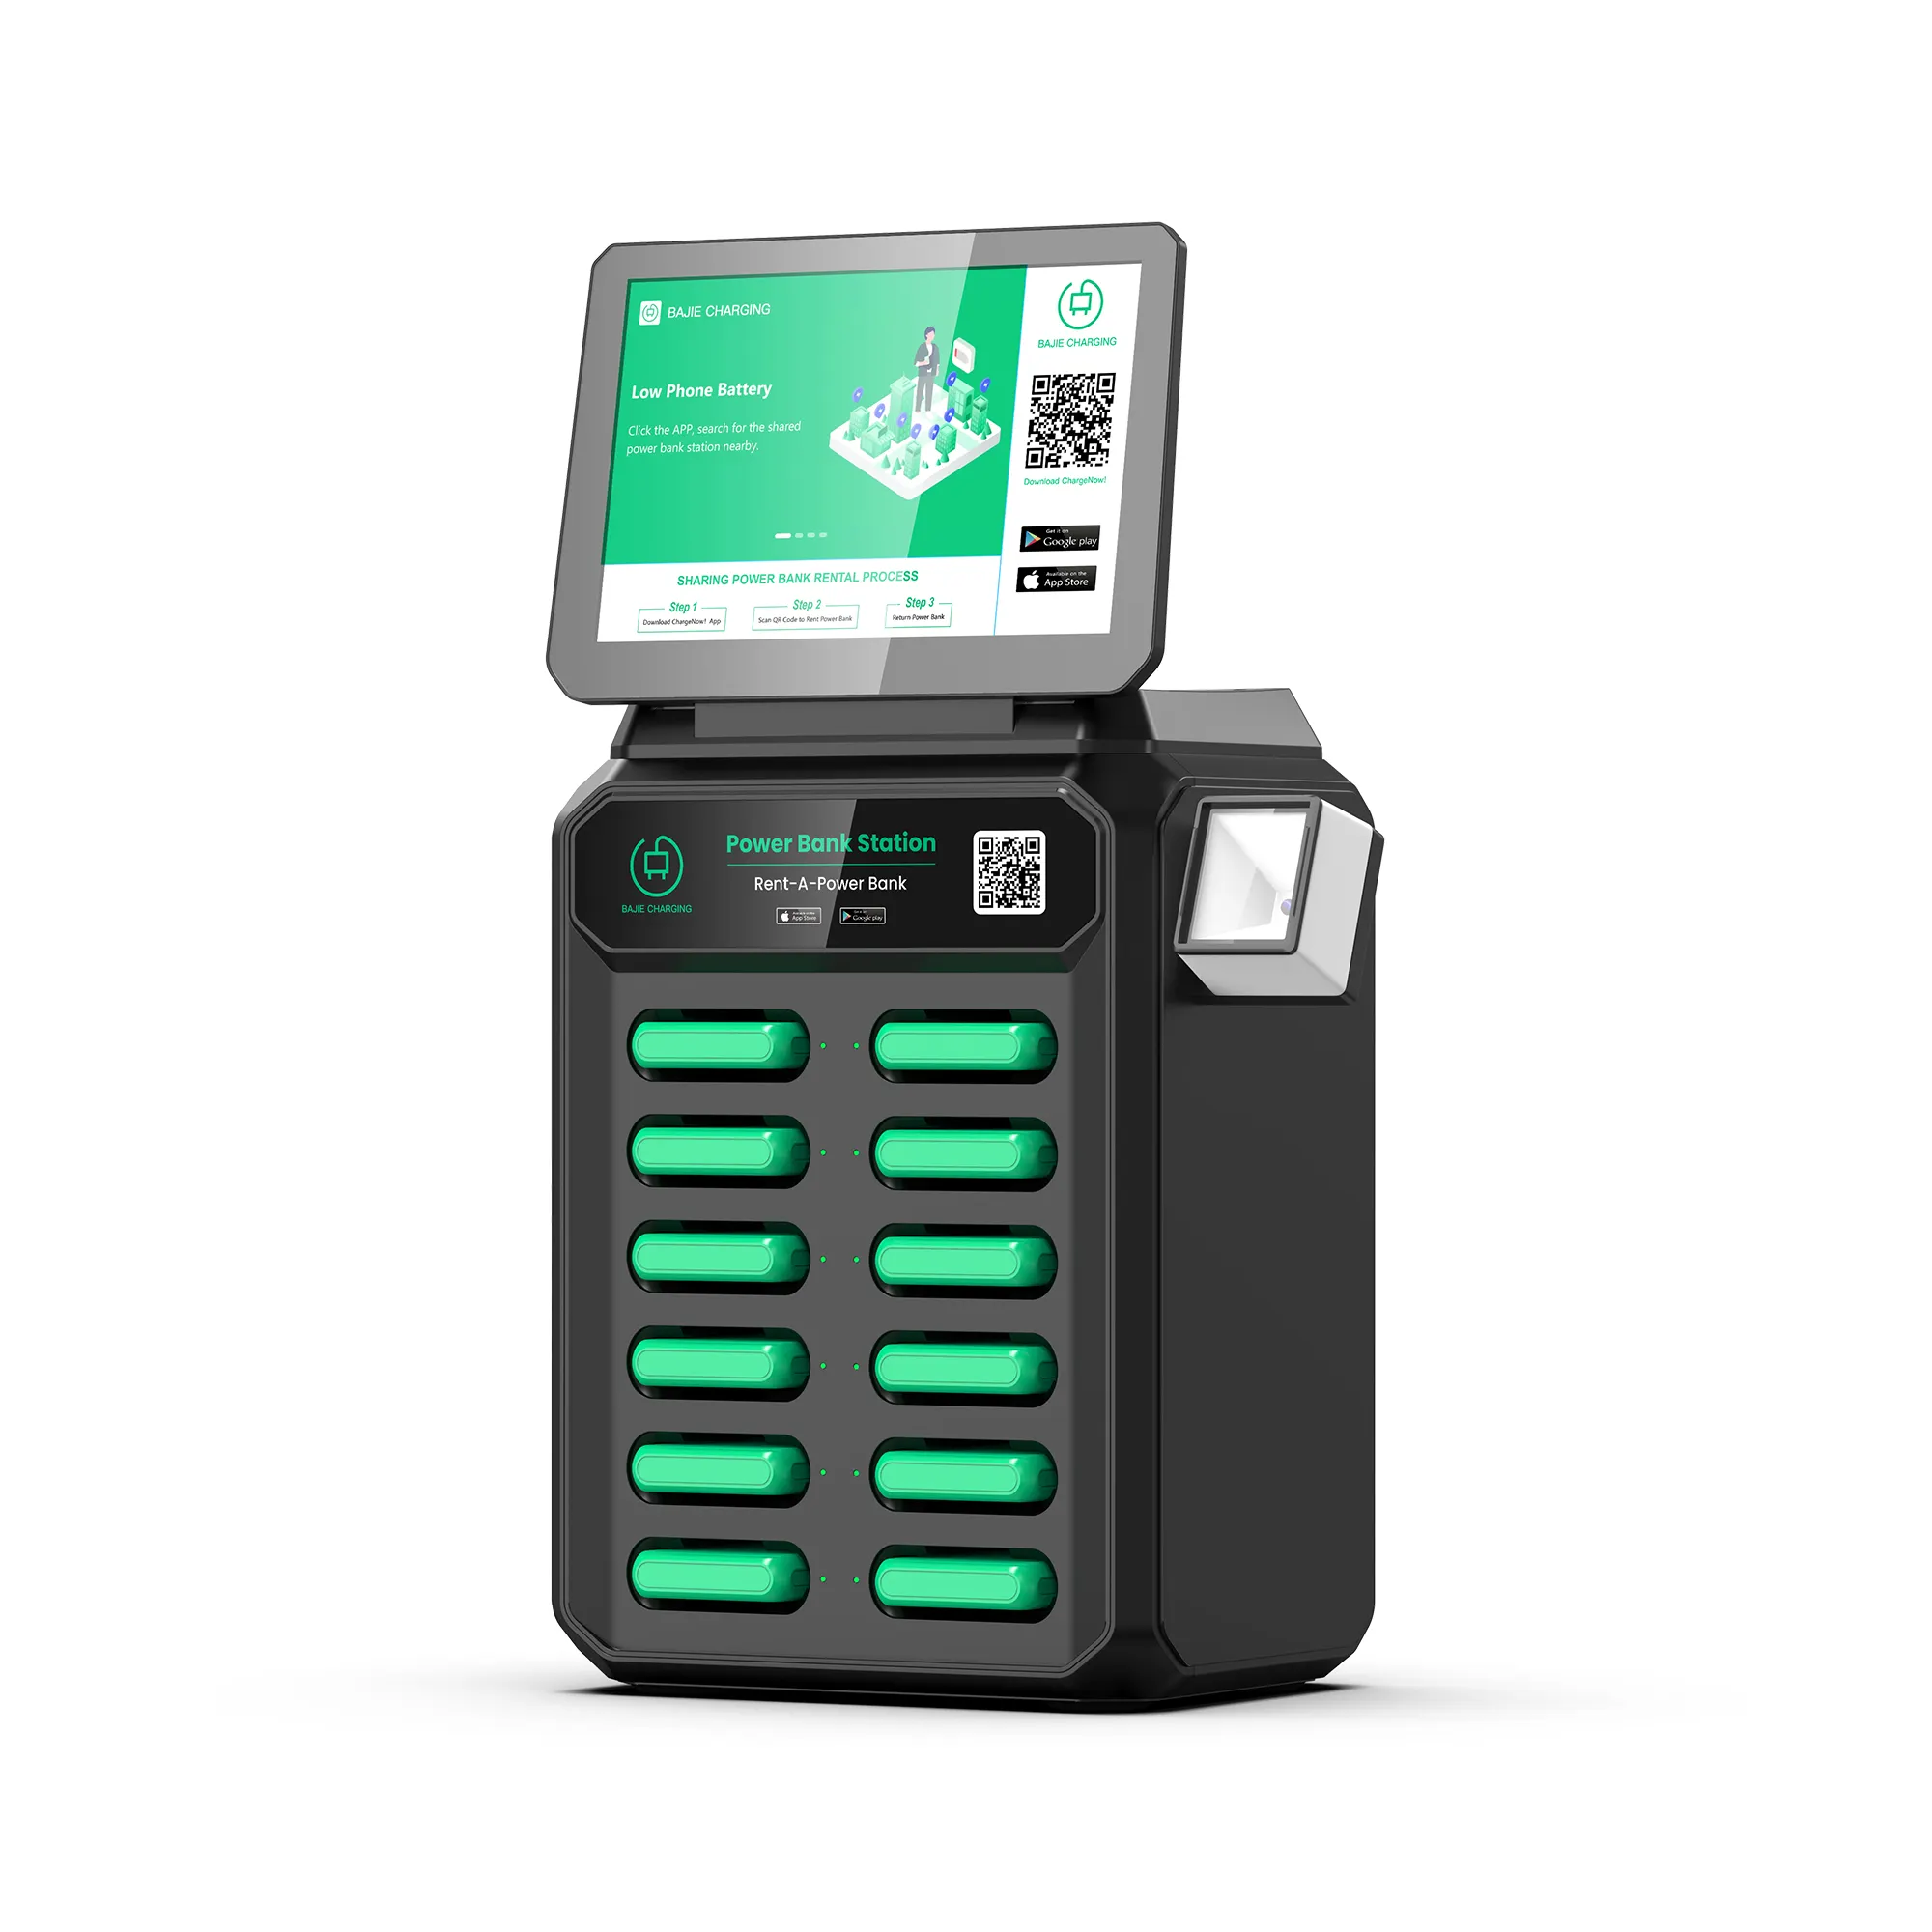 12 Slots Share Power Bank Rental Station With Screen And POS Reader Customizable The Easiest Way To Rent The Battery